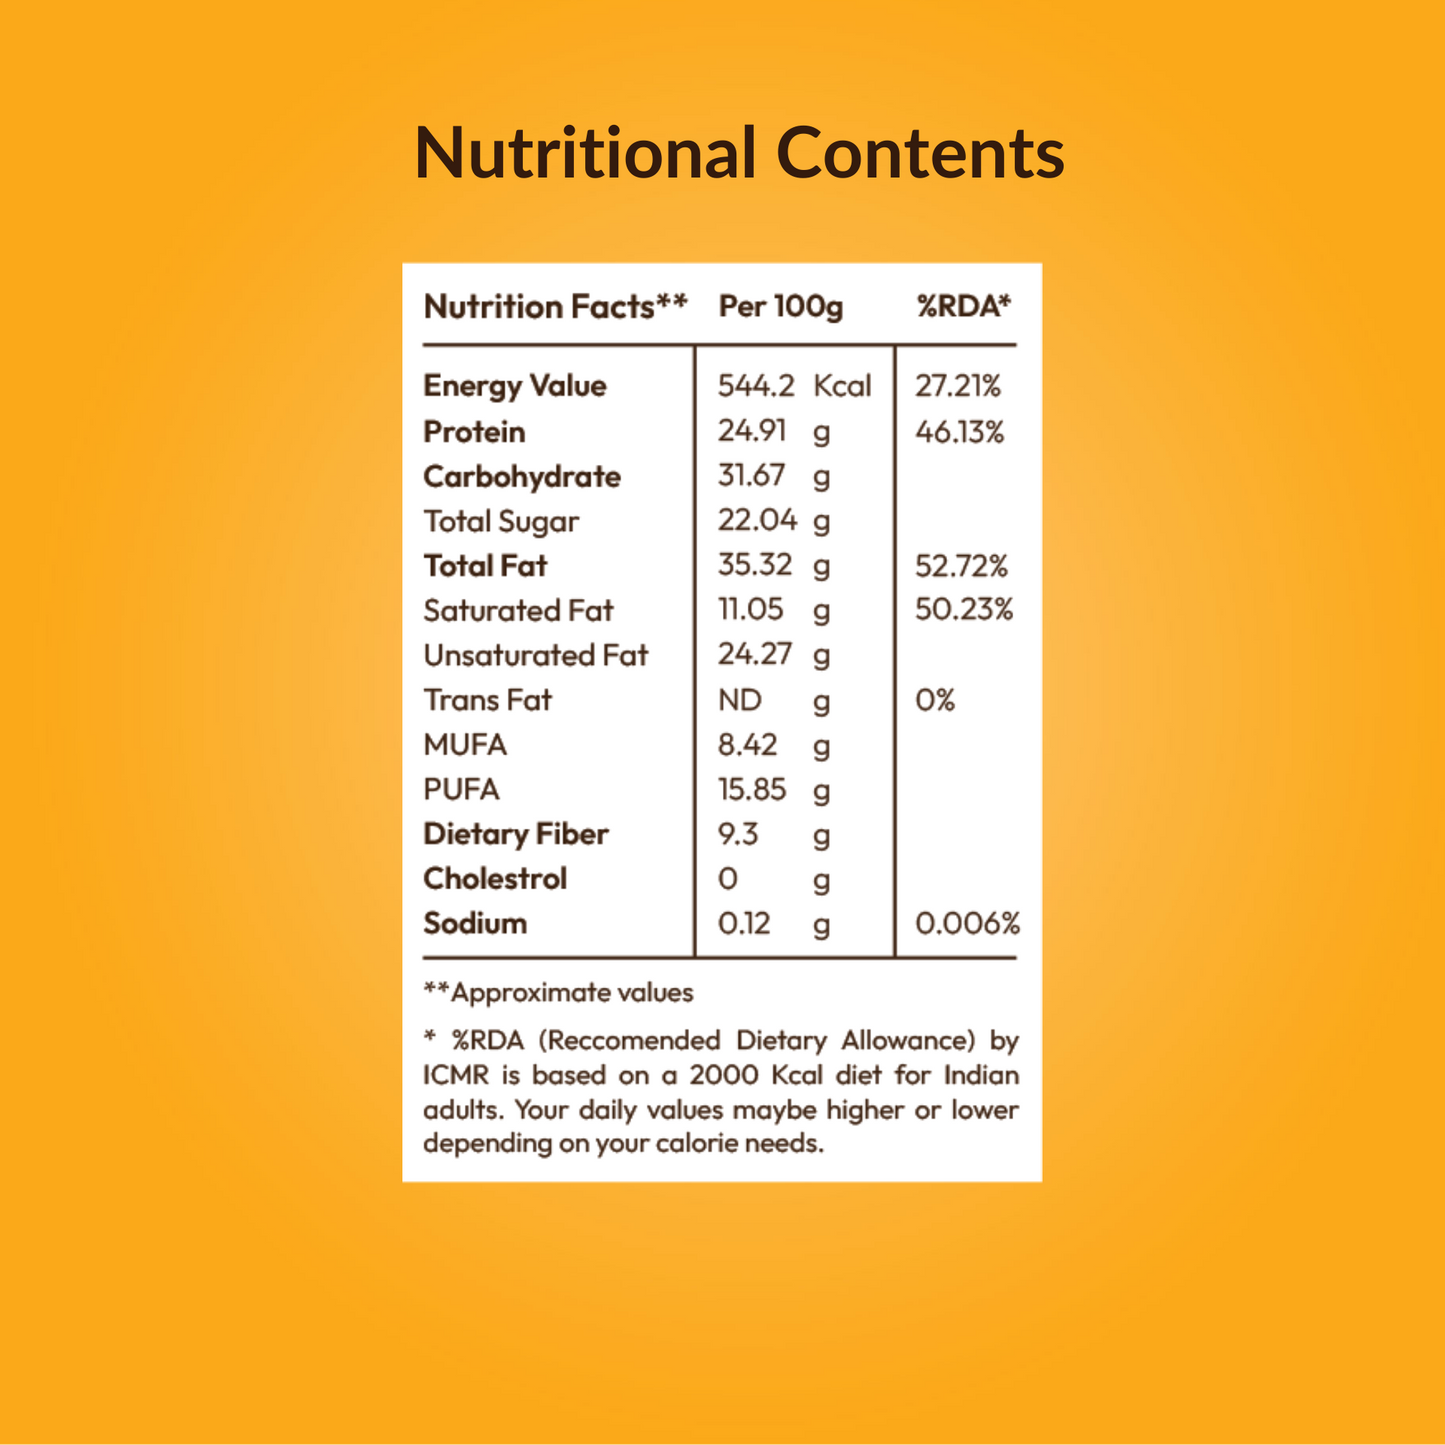 powernoms high protein mix nutrition content table